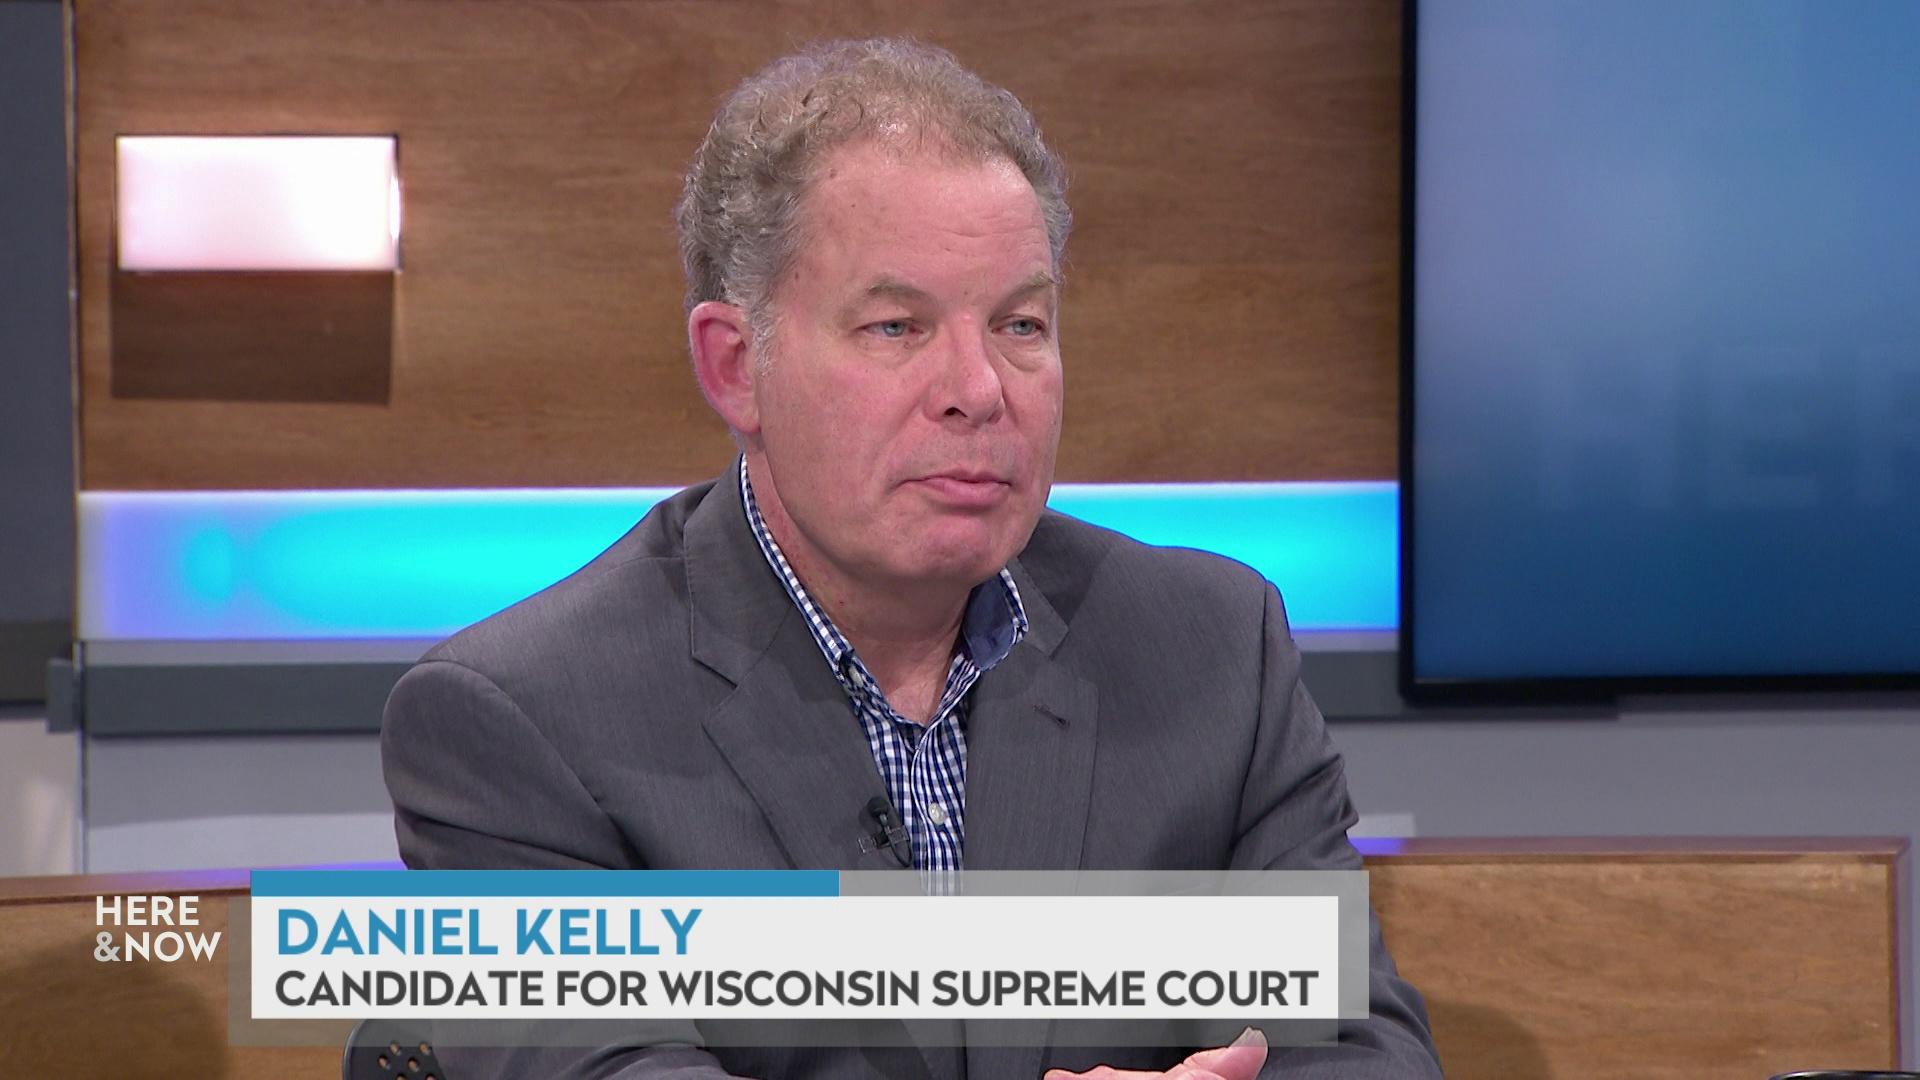 A still image from a video shows Daniel Kelly seated at the 'Here & Now' set featuring wood paneling, with a graphic at bottom reading 'Daniel Kelly' and 'Wisconsin Supreme Court Candidate.'